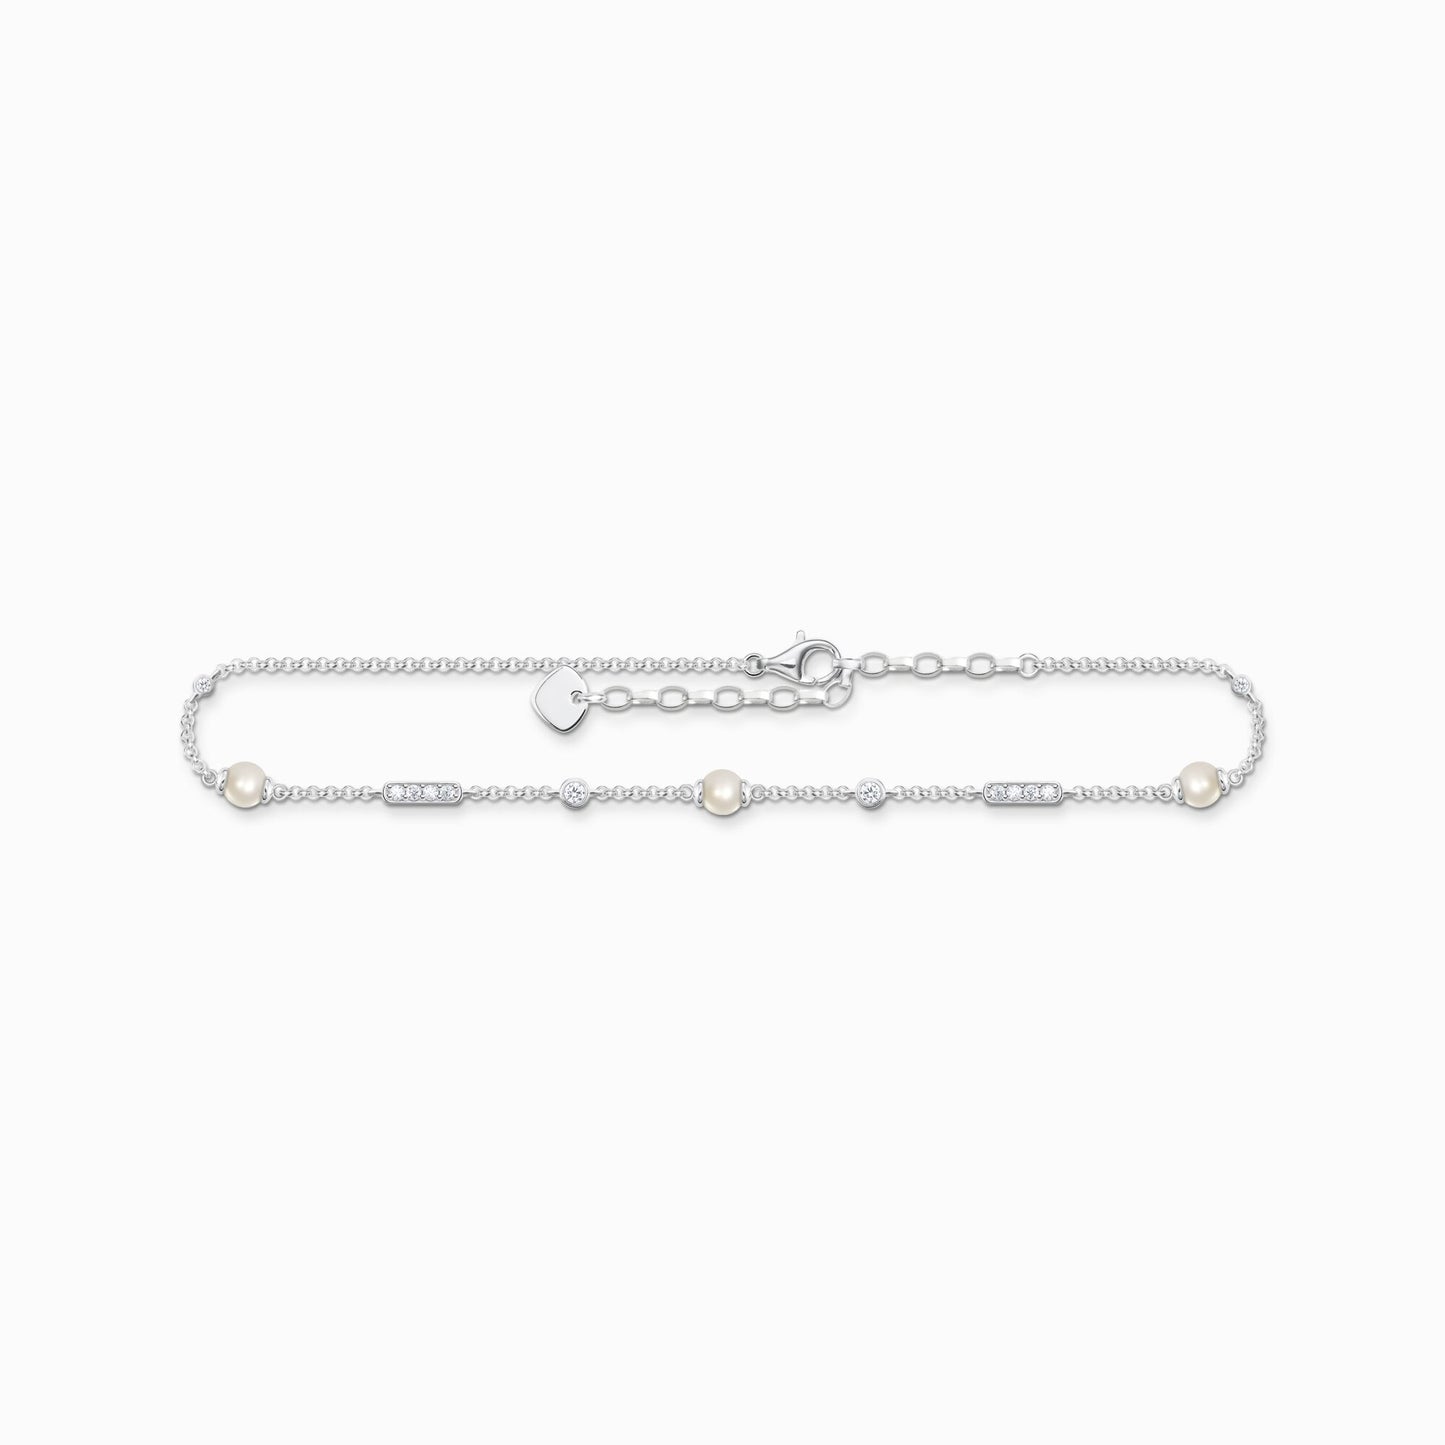 Thomas SABO Anklet with pearls and white stones silver